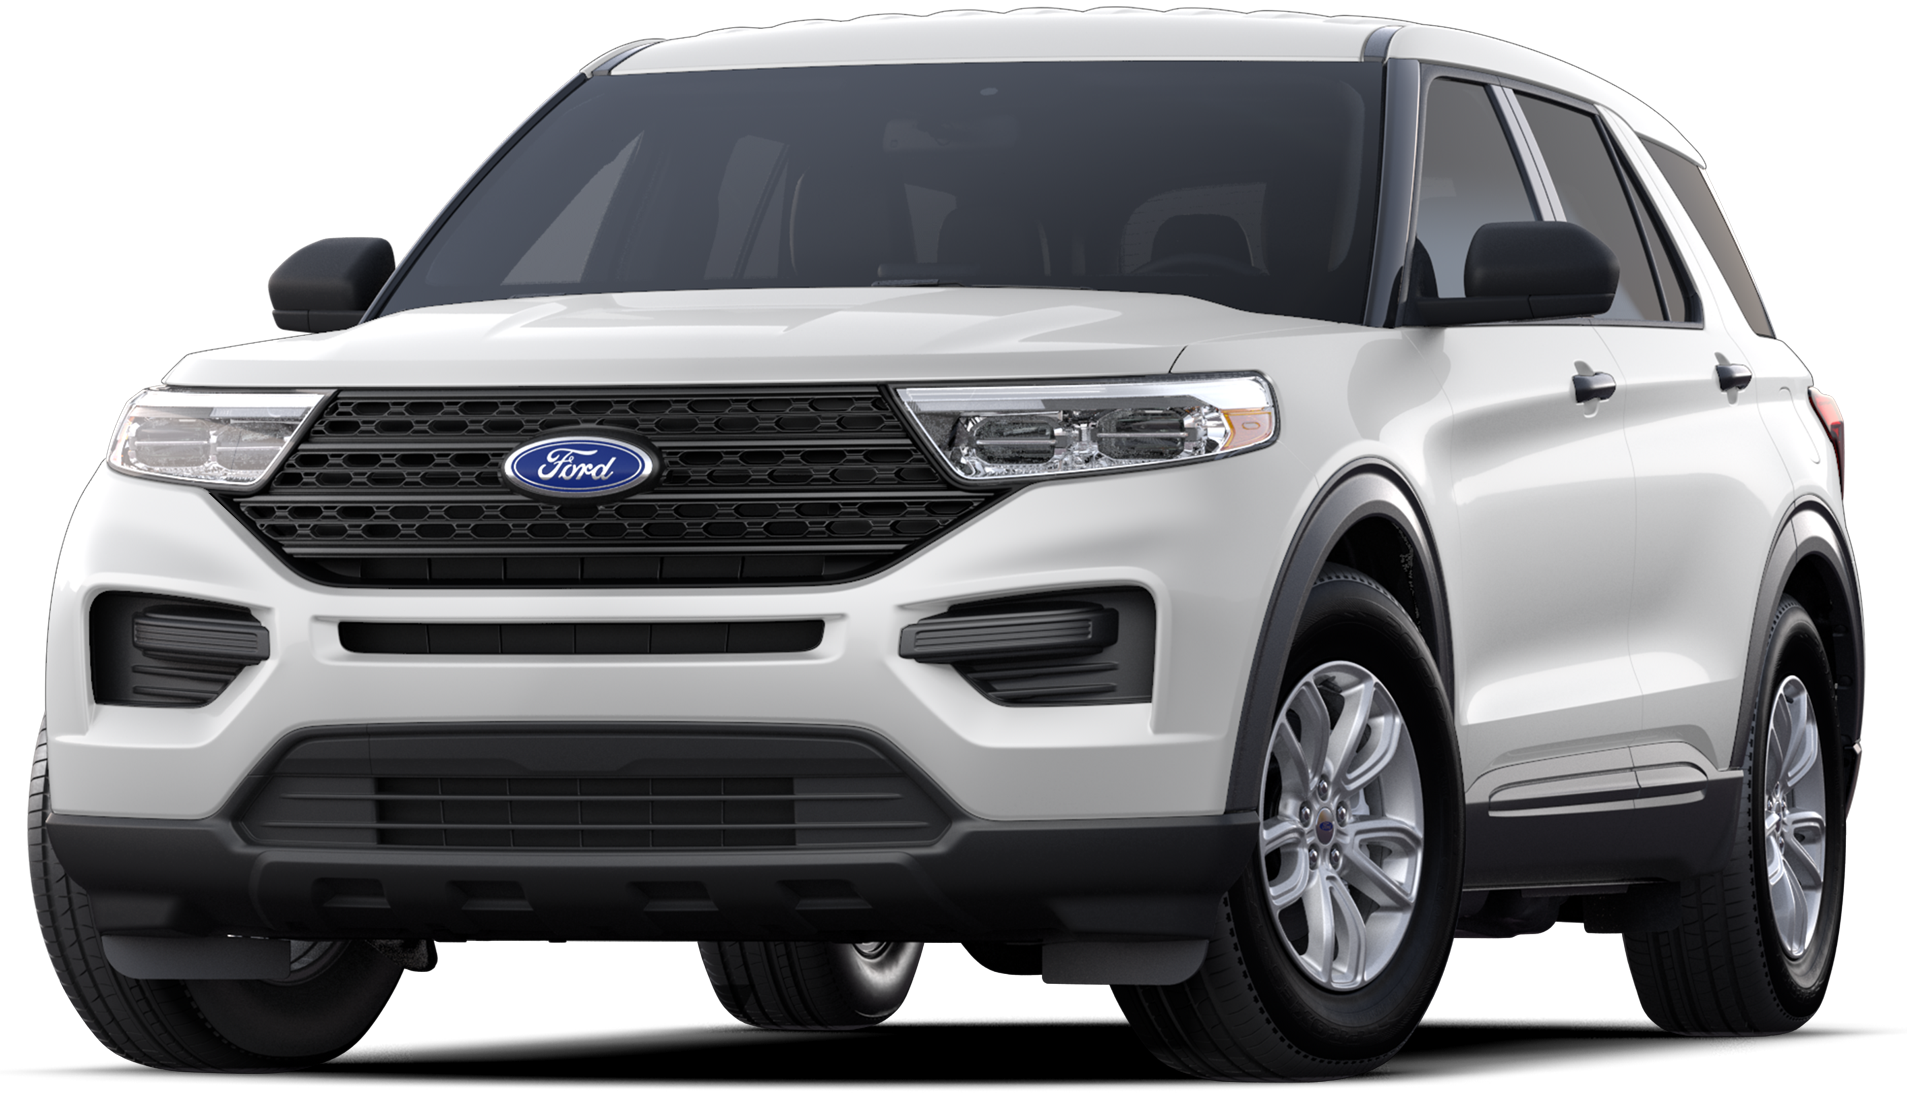 2020-ford-explorer-incentives-specials-offers-in-columbus-oh